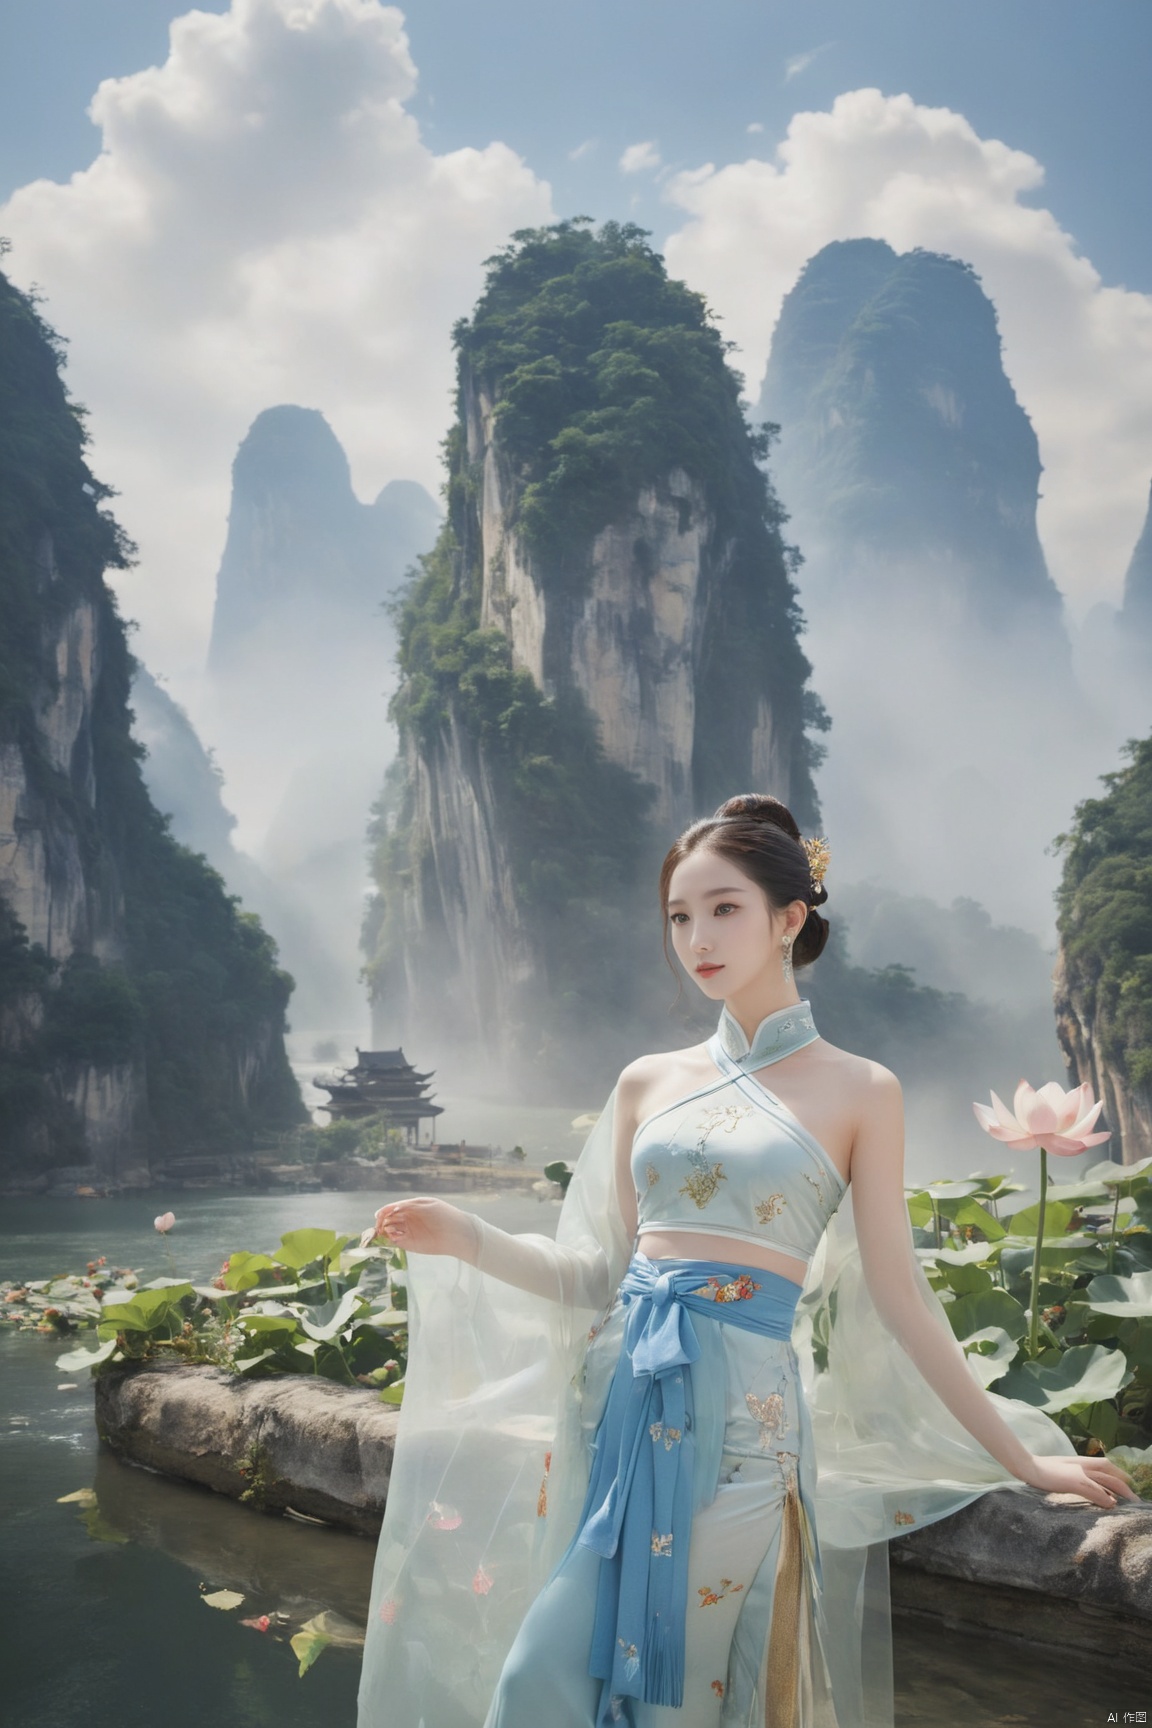  Detailed high, high precision, high quality, the UHD, 16 k, rich details, abundant element, shows that a girl, beautiful, lotus, lotus leaf, pearlygates, traditional clothing, clothing patterns, miao clothing headwear, Face Score, MAJICMIX STYLE, arien_hanfu, monkren,full-length mirror,Breast, huge,Dramatic clouds, mountains, rivers, ancient buildings,Guilin landscape, Guilin, Hangzhou,Sunny,shoes,,full body,film grain, Realistic, qipao